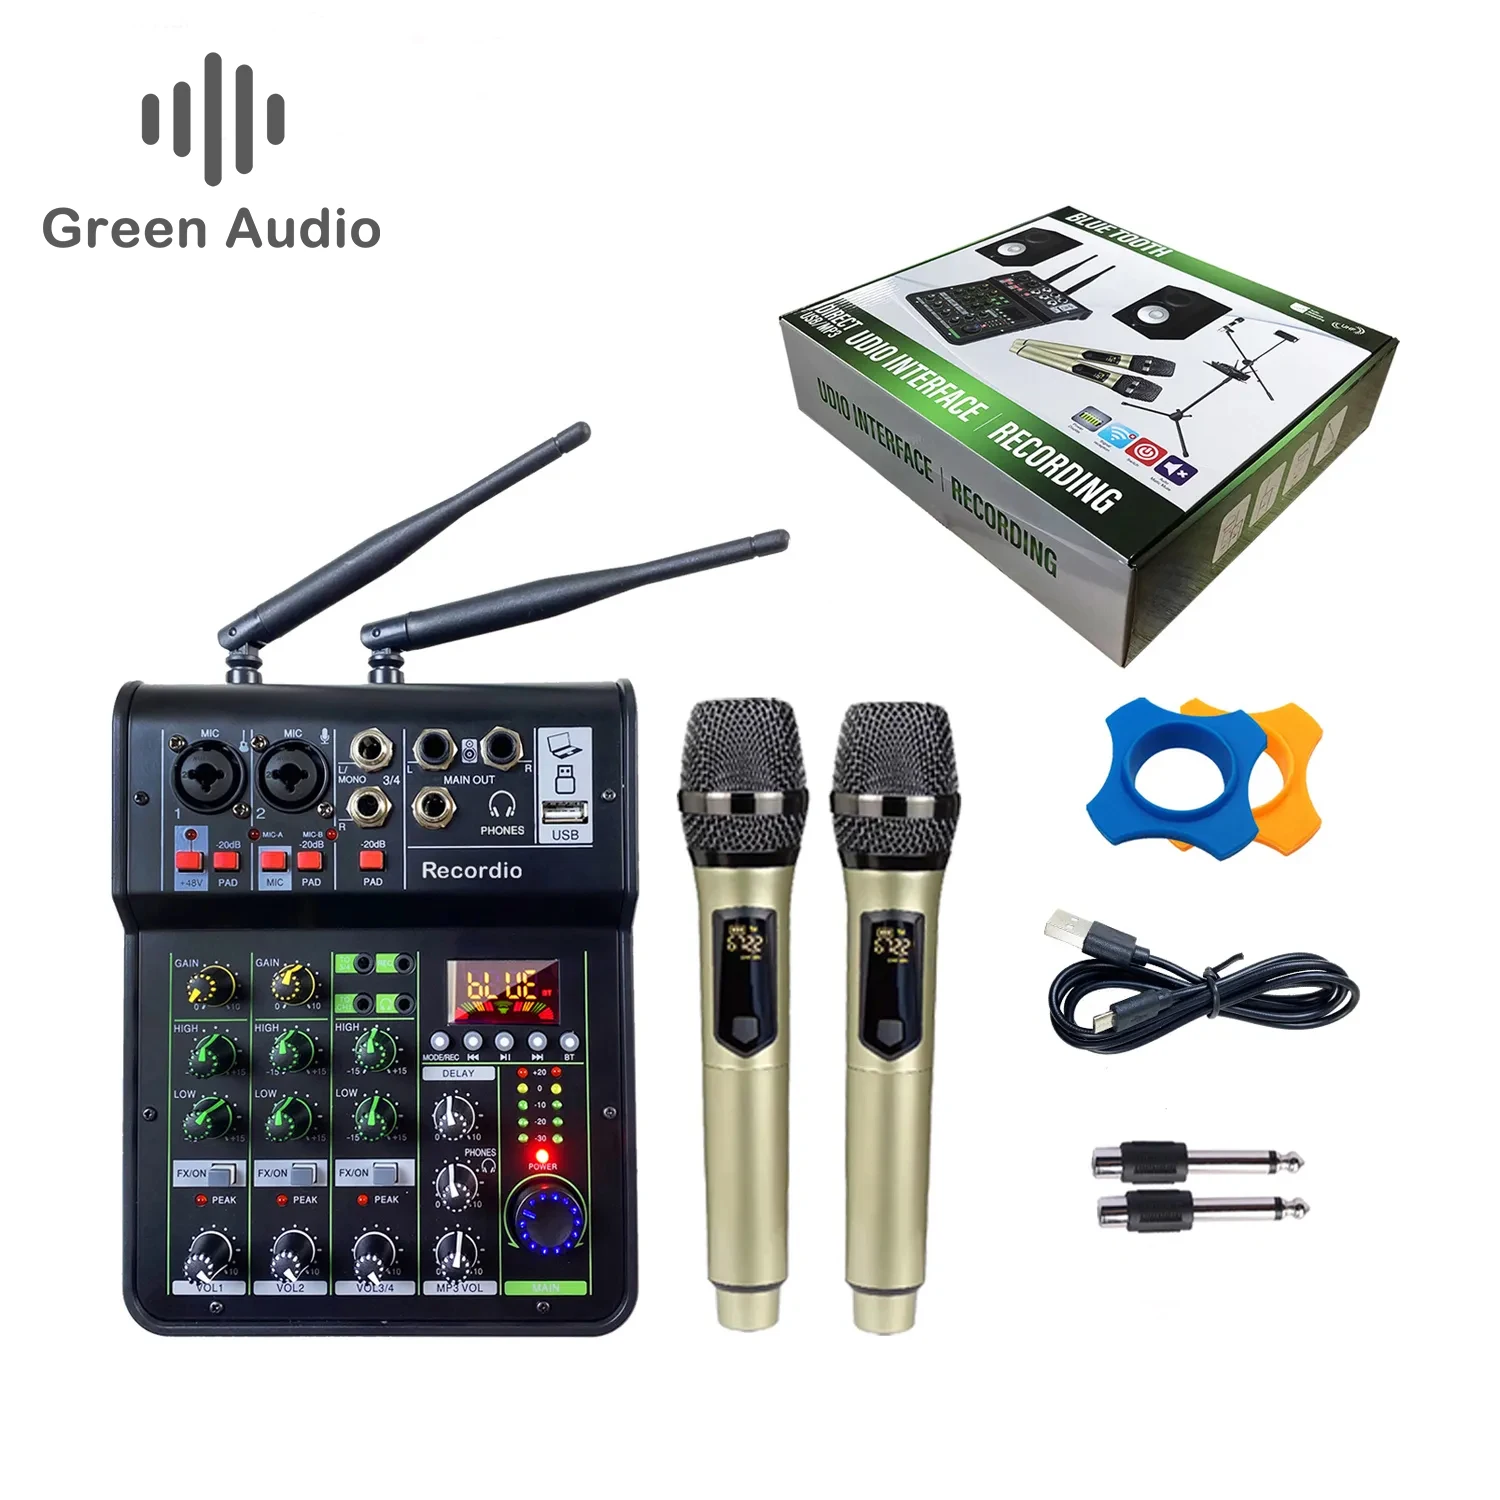 

GAX-450C Audio Mixing with UHF Wireless Microphone 4 Channel Stereo Mixer Console Blueteeth USB for DJ Karaoke PC Record